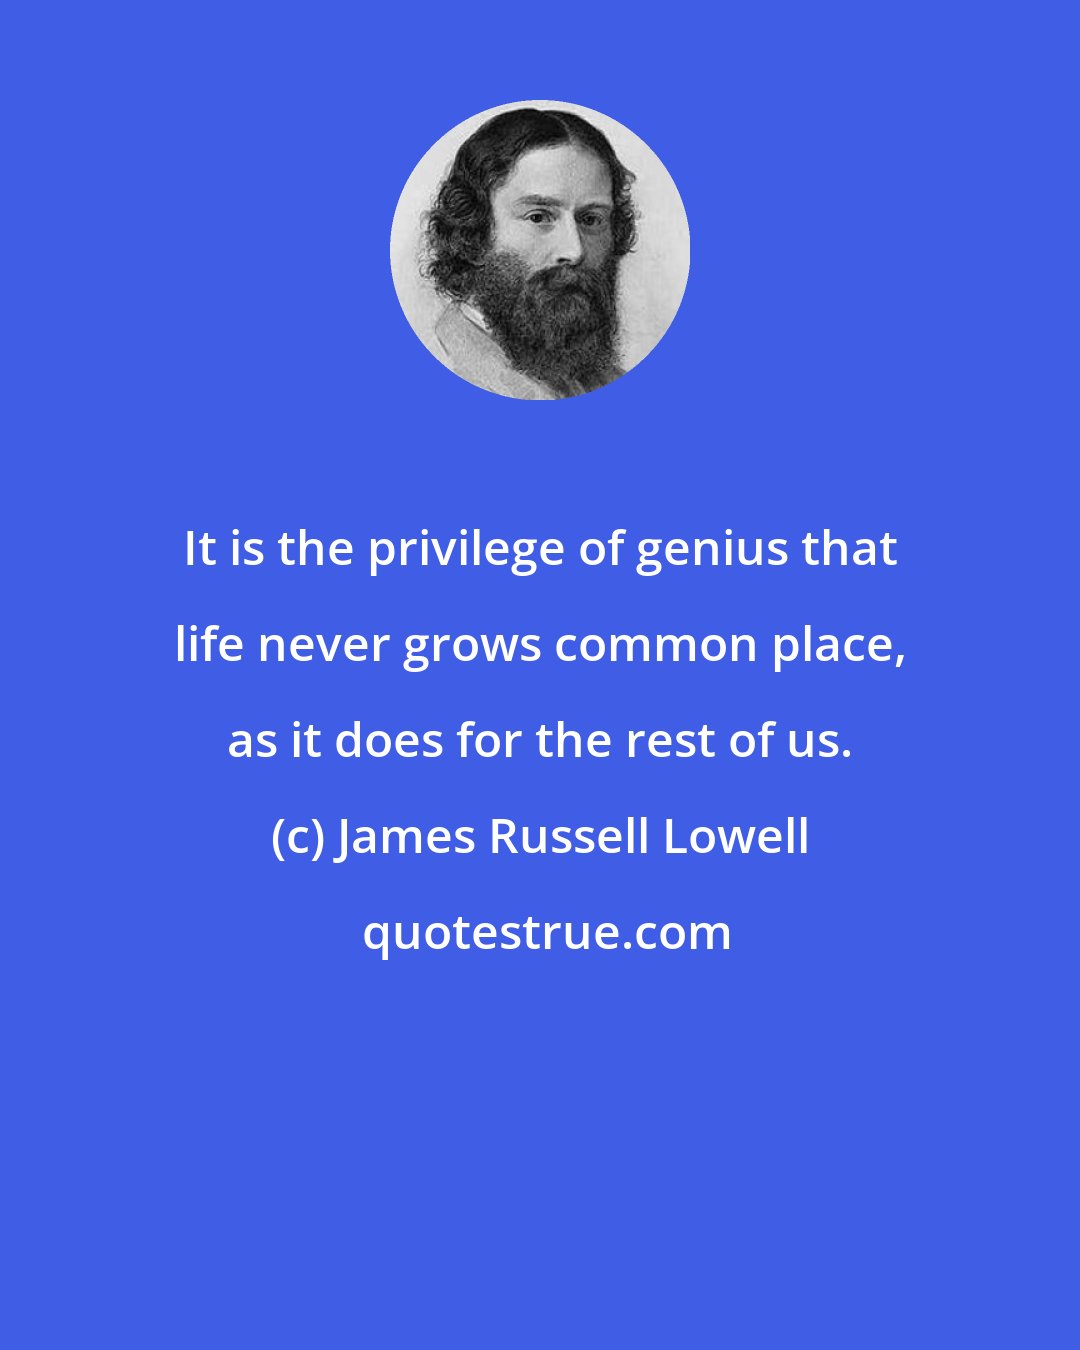 James Russell Lowell: It is the privilege of genius that life never grows common place, as it does for the rest of us.